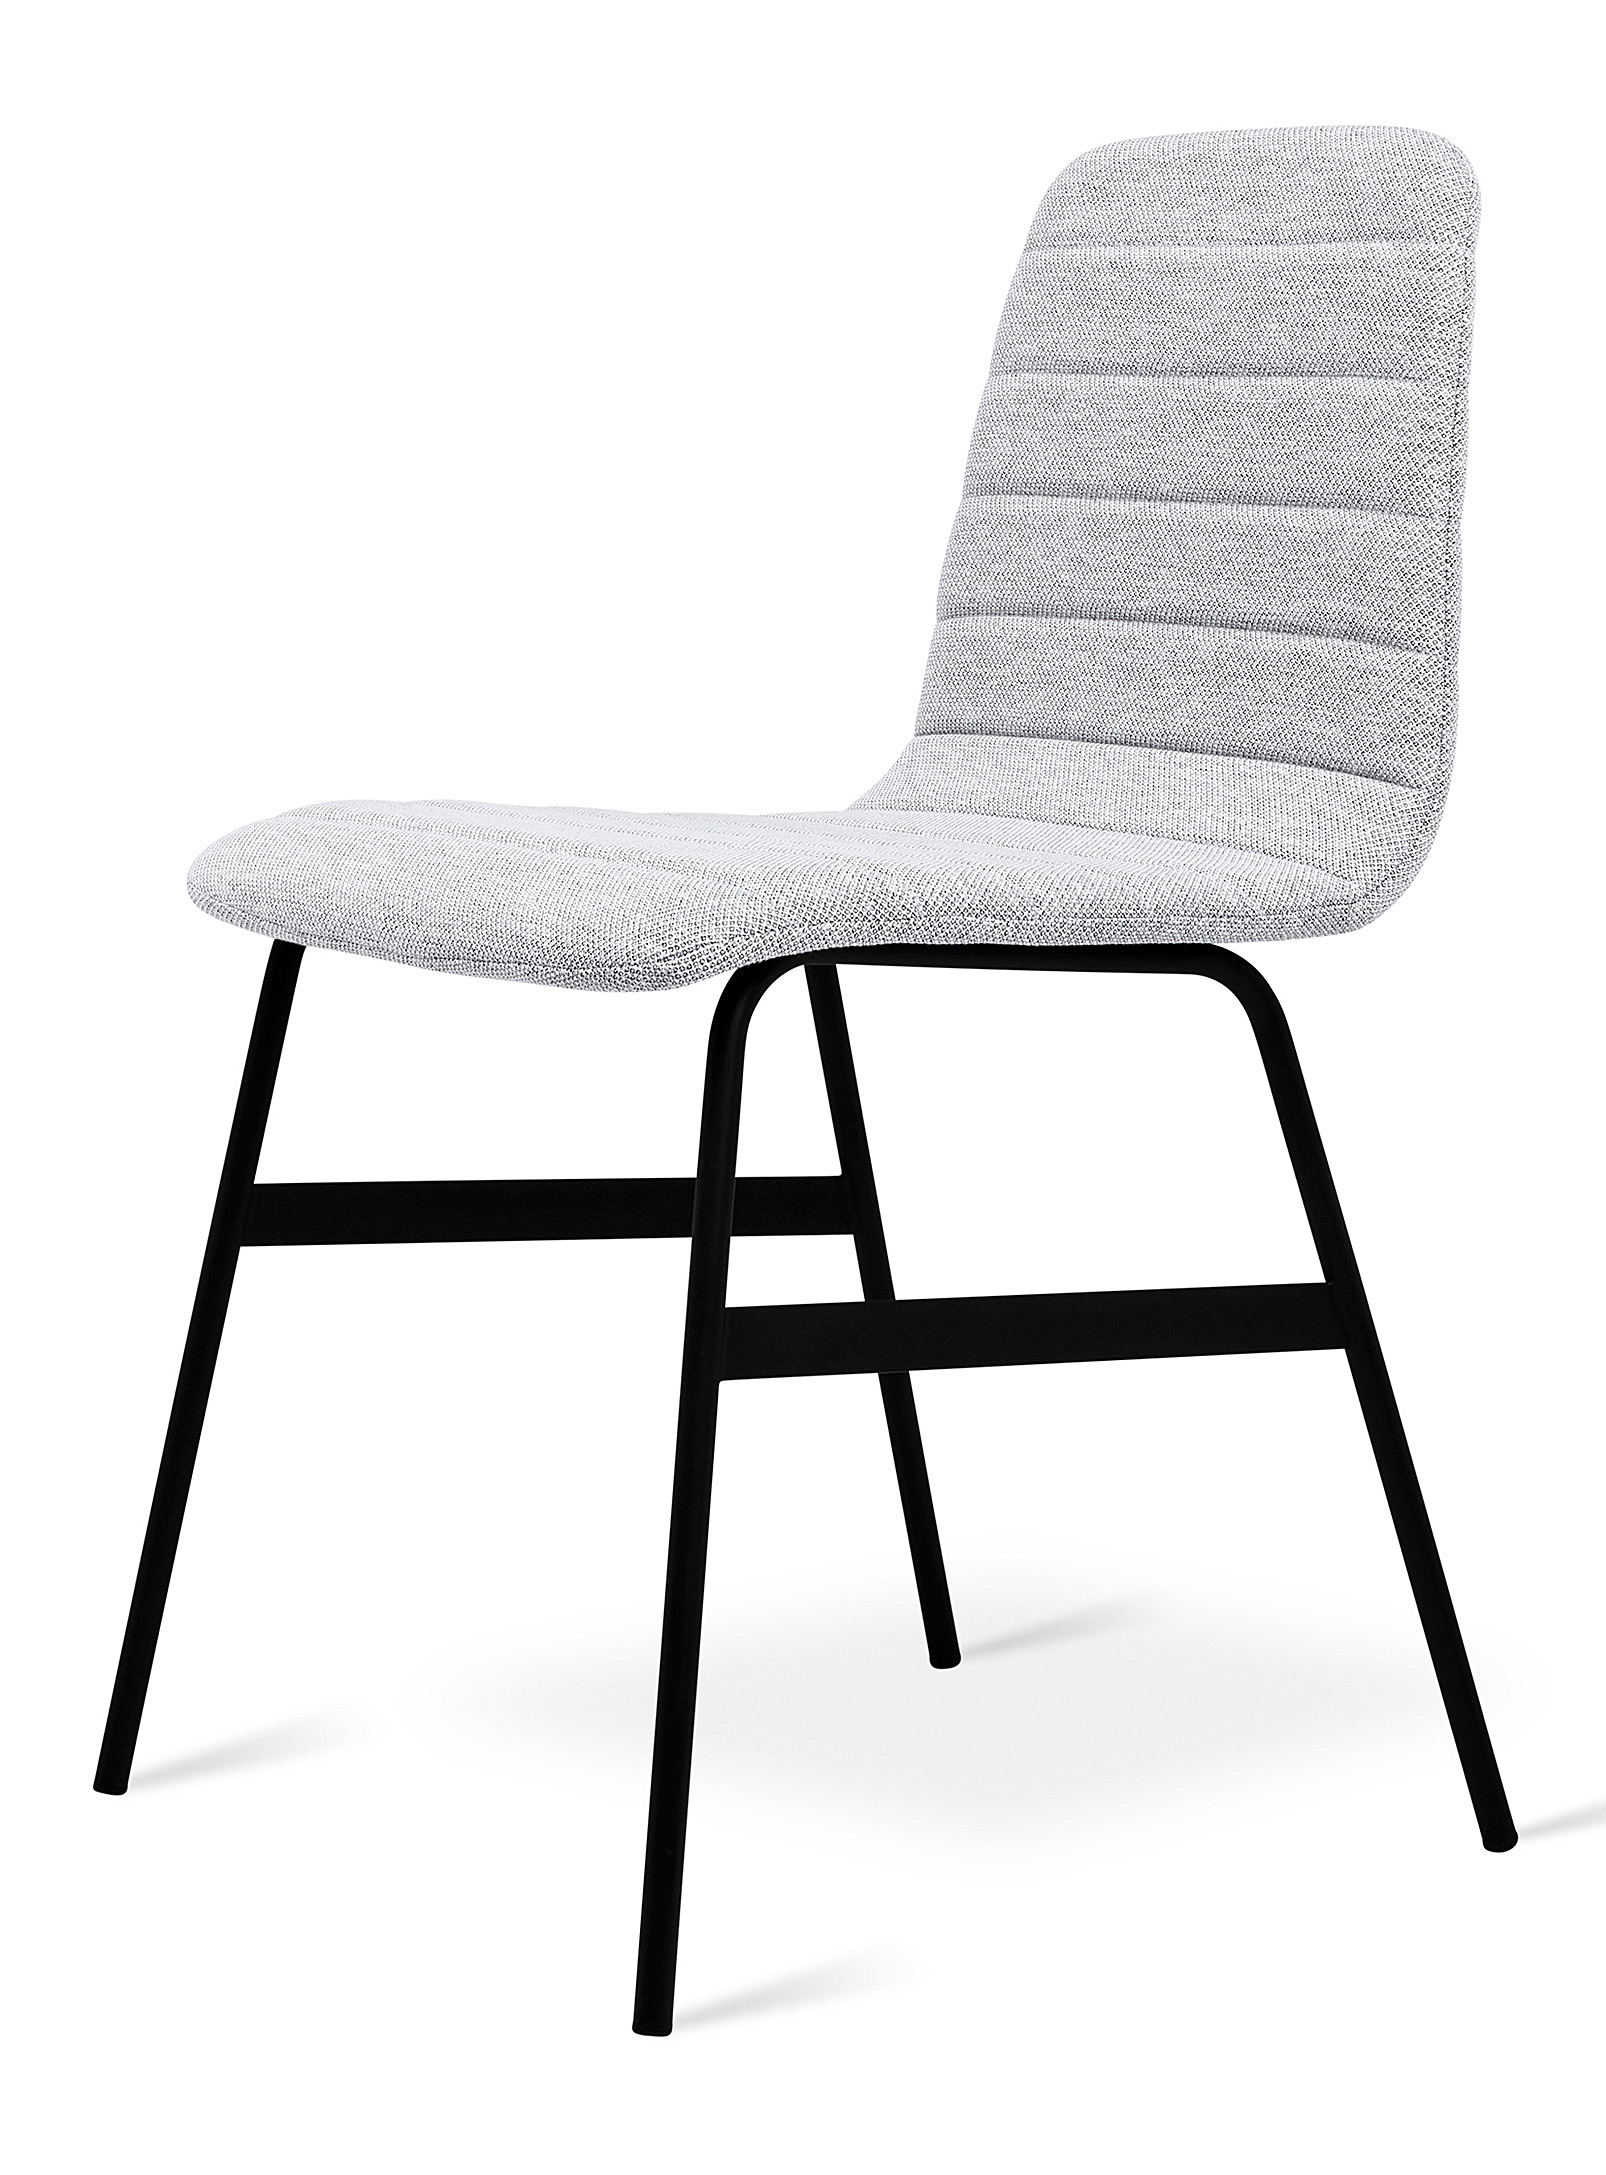 Gus Modern Quilted Chair In Gray